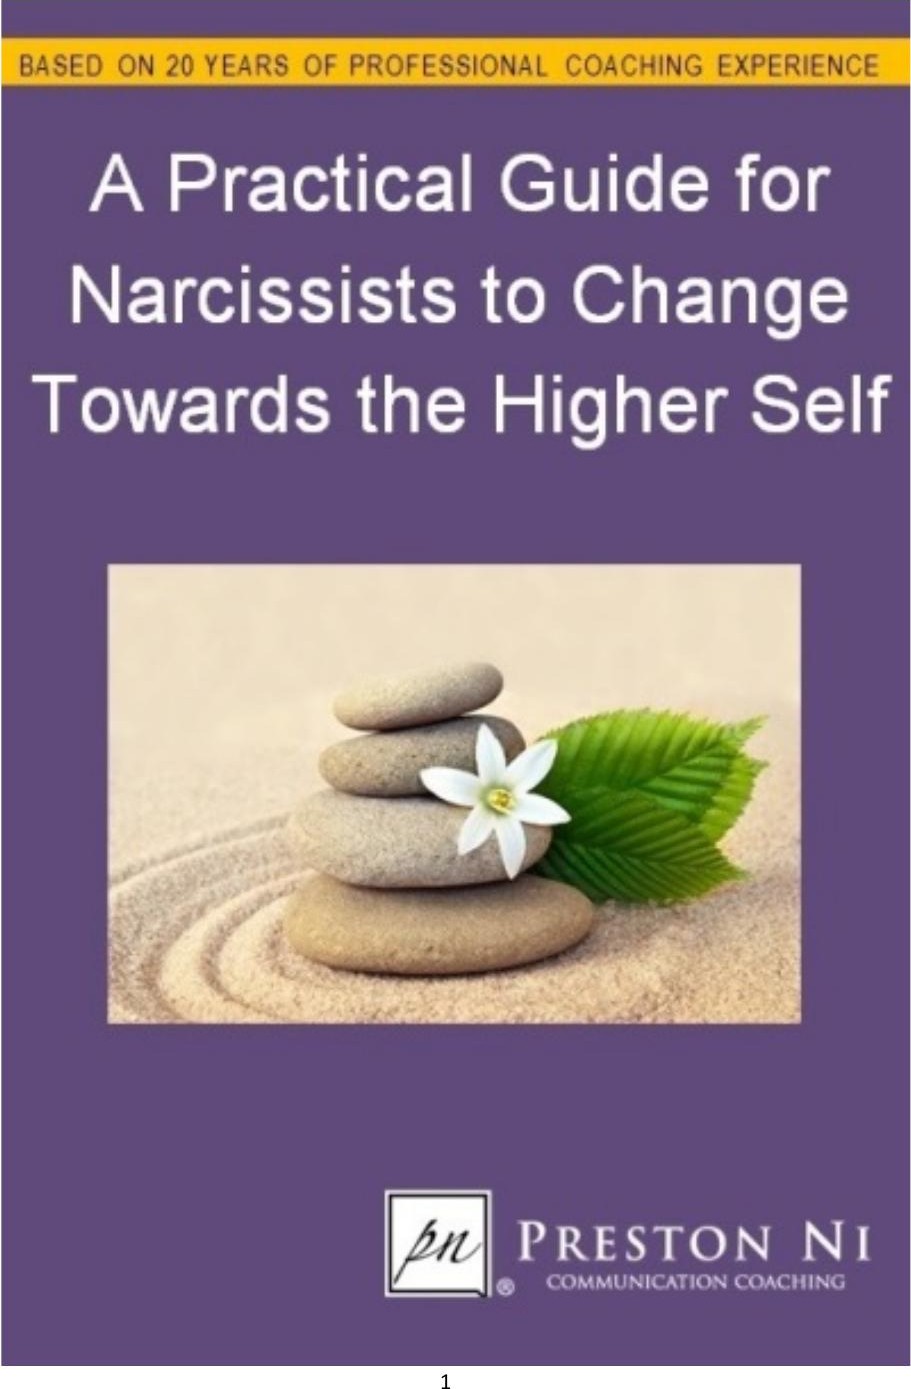 A Practical Guide for Narcissists to Change Towards the Higher Self